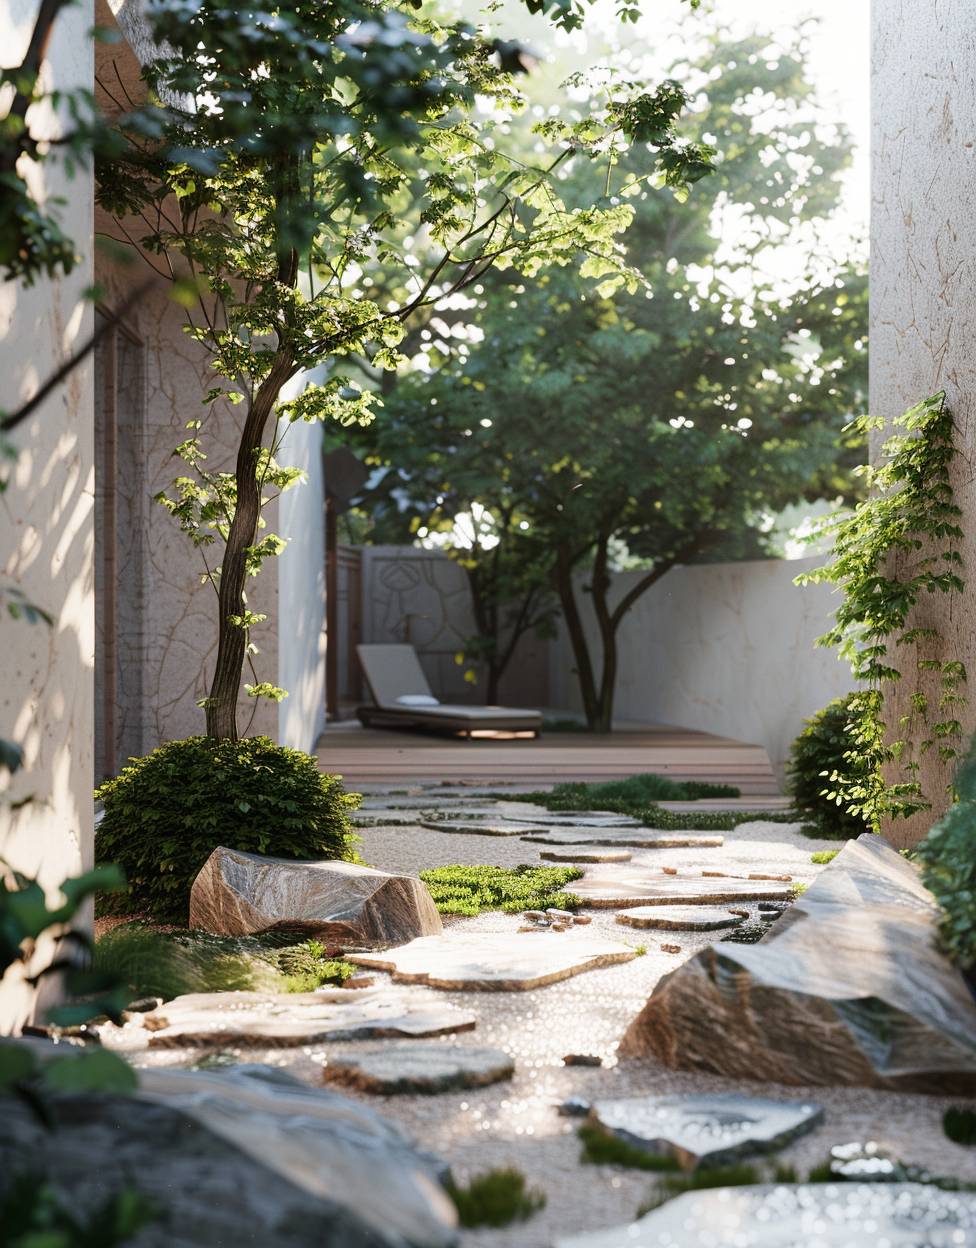 landscape architect, in the style of tranquil serenity, 【vray tracing】, stone sculptures, 【32k uhd】, 【somber mood】, minimalism with movement, wood